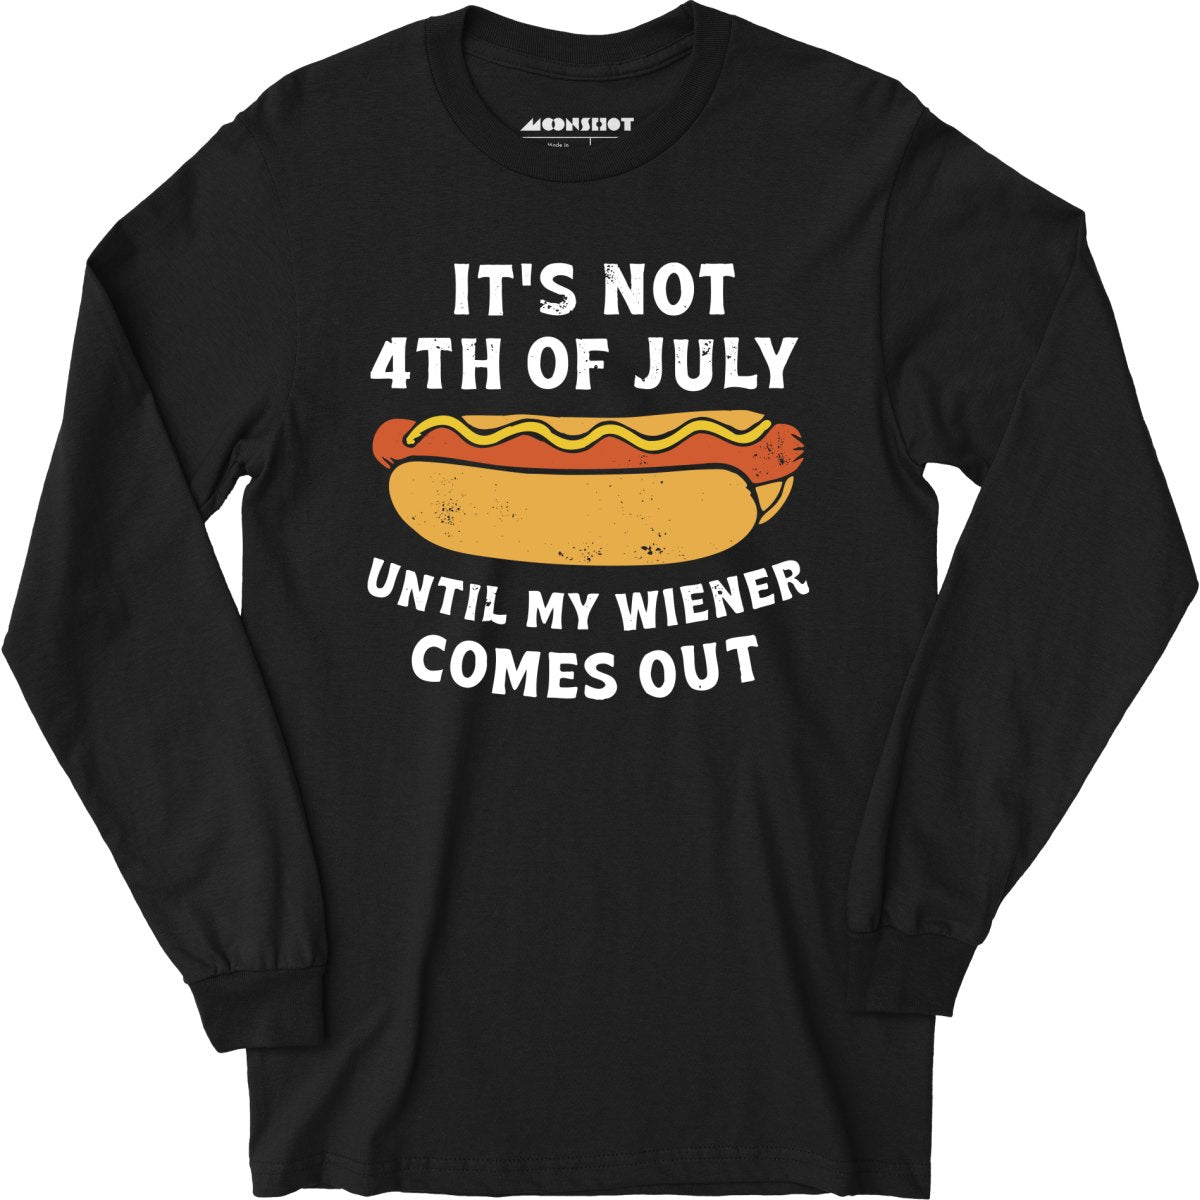 It's Not 4th of July Until My Wiener Comes Out - Long Sleeve T-Shirt